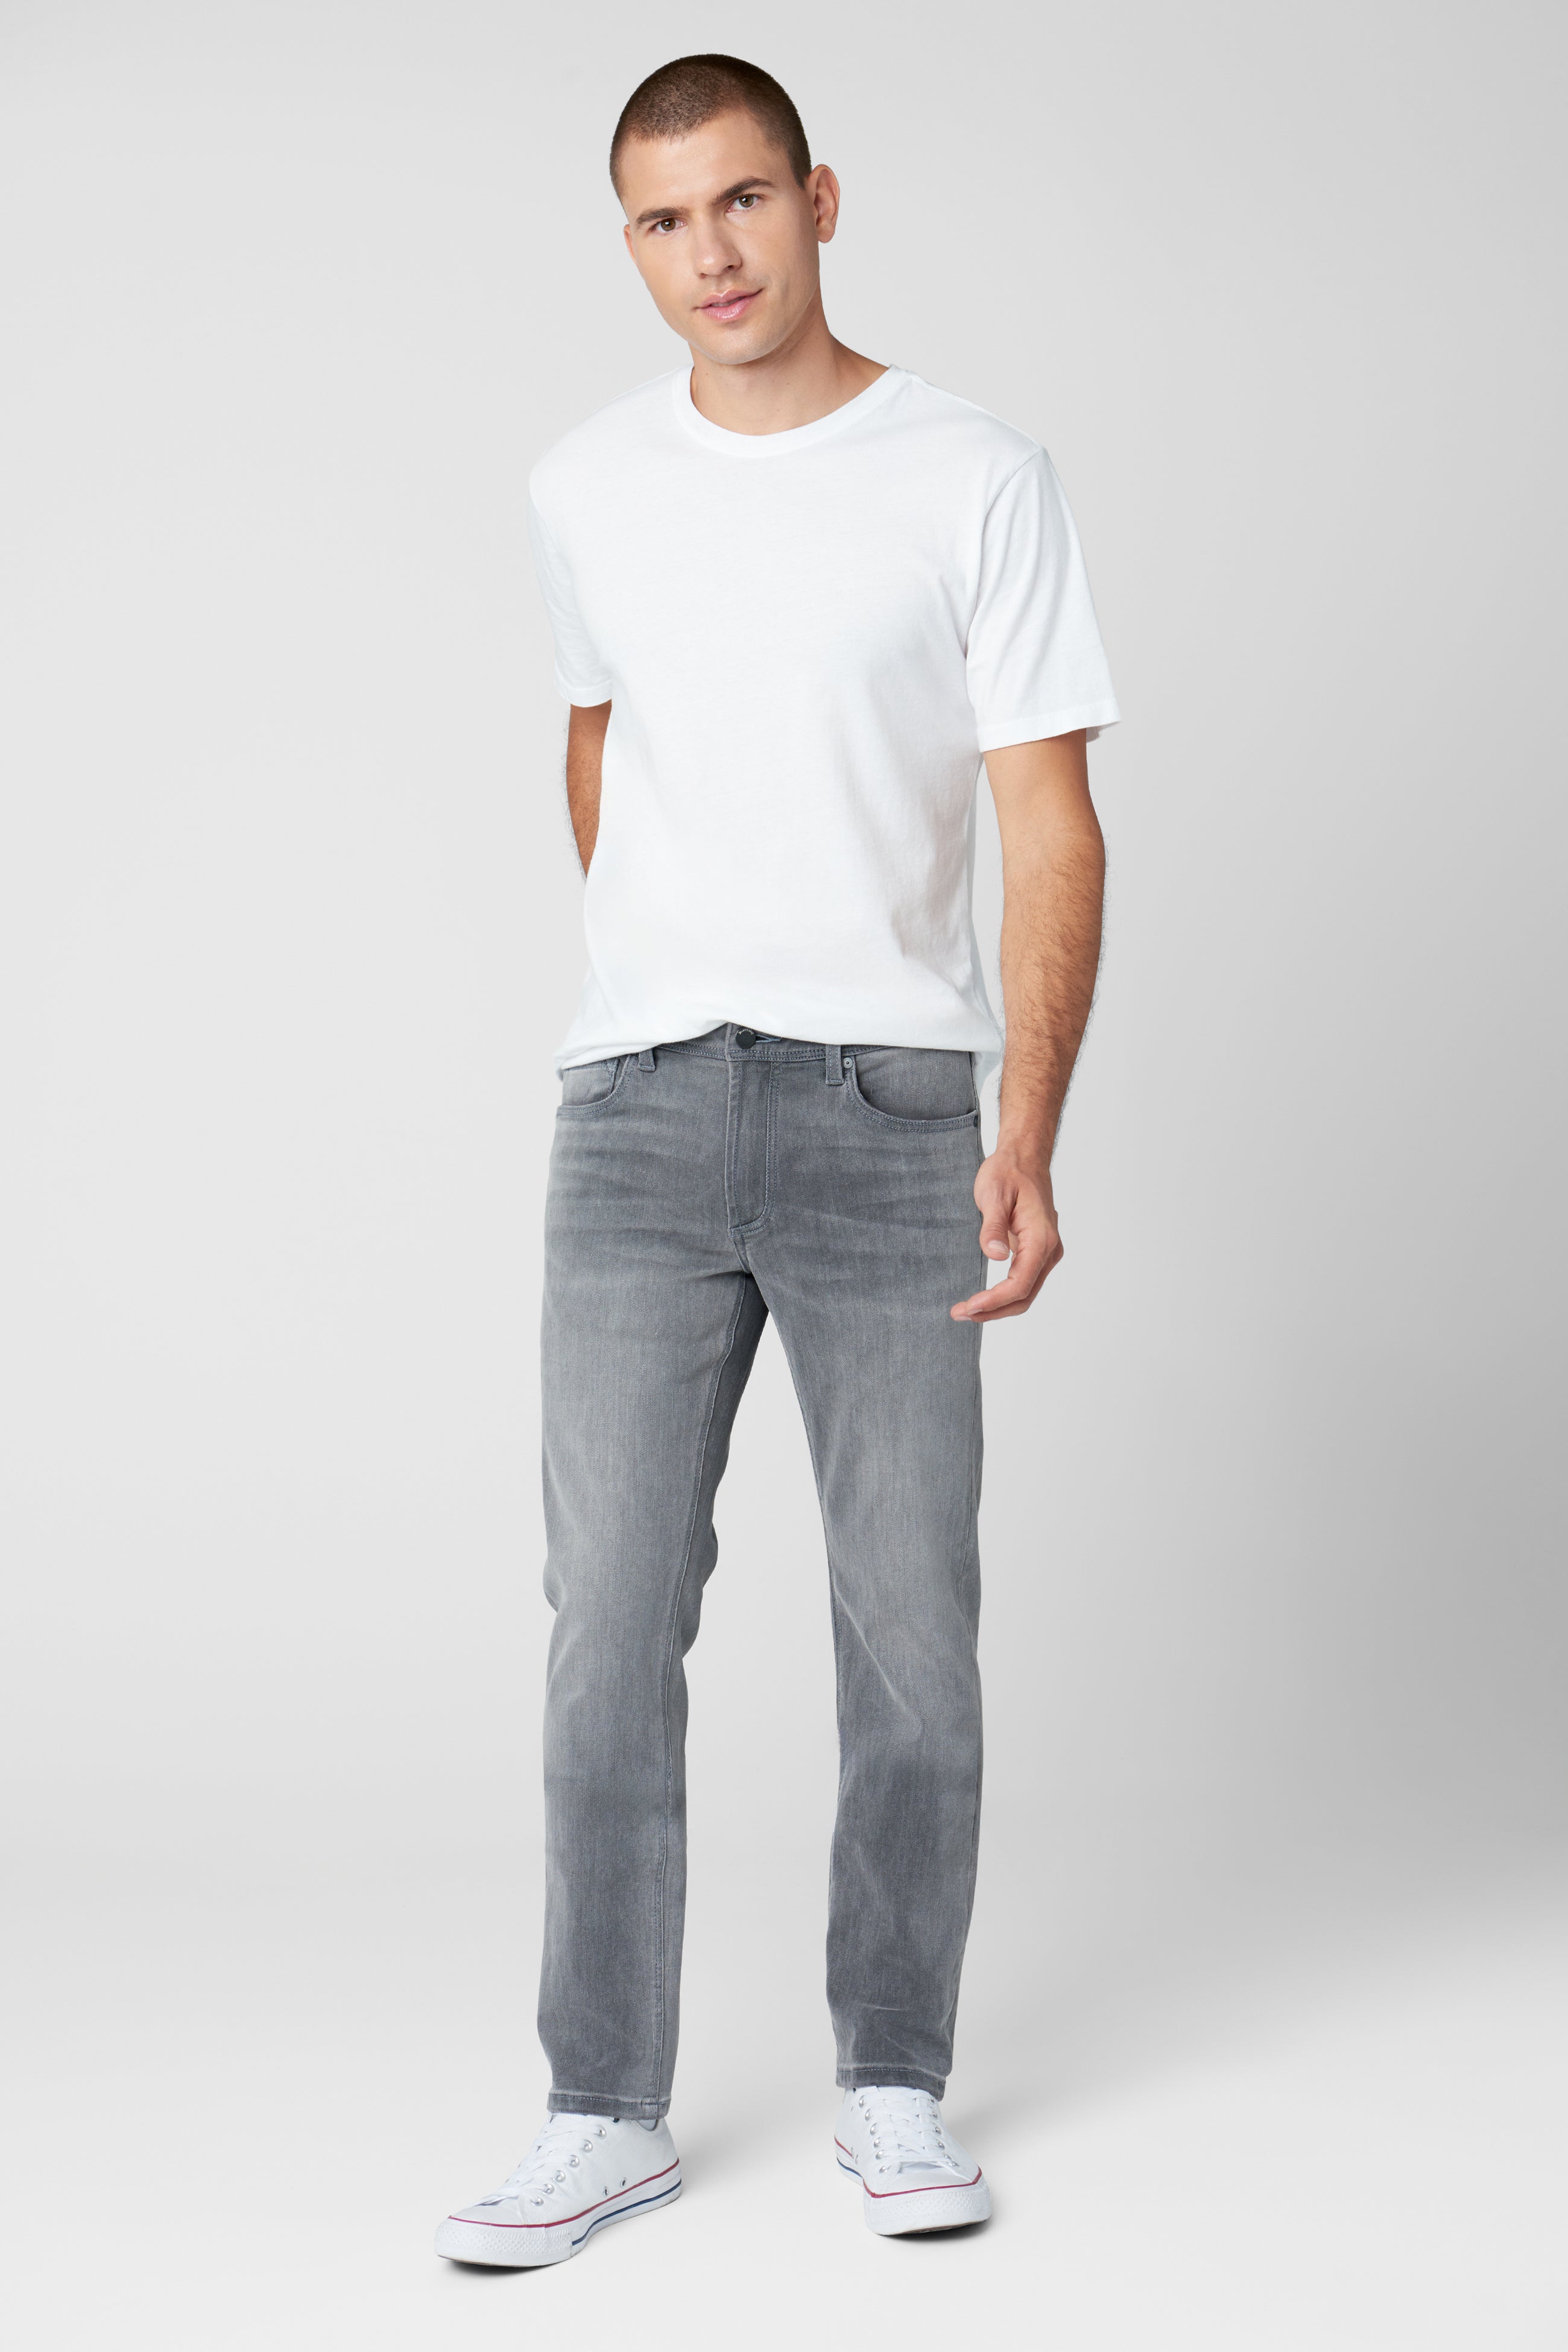 The Wooster Wardrobe Malfunction Pant | Blank NYC